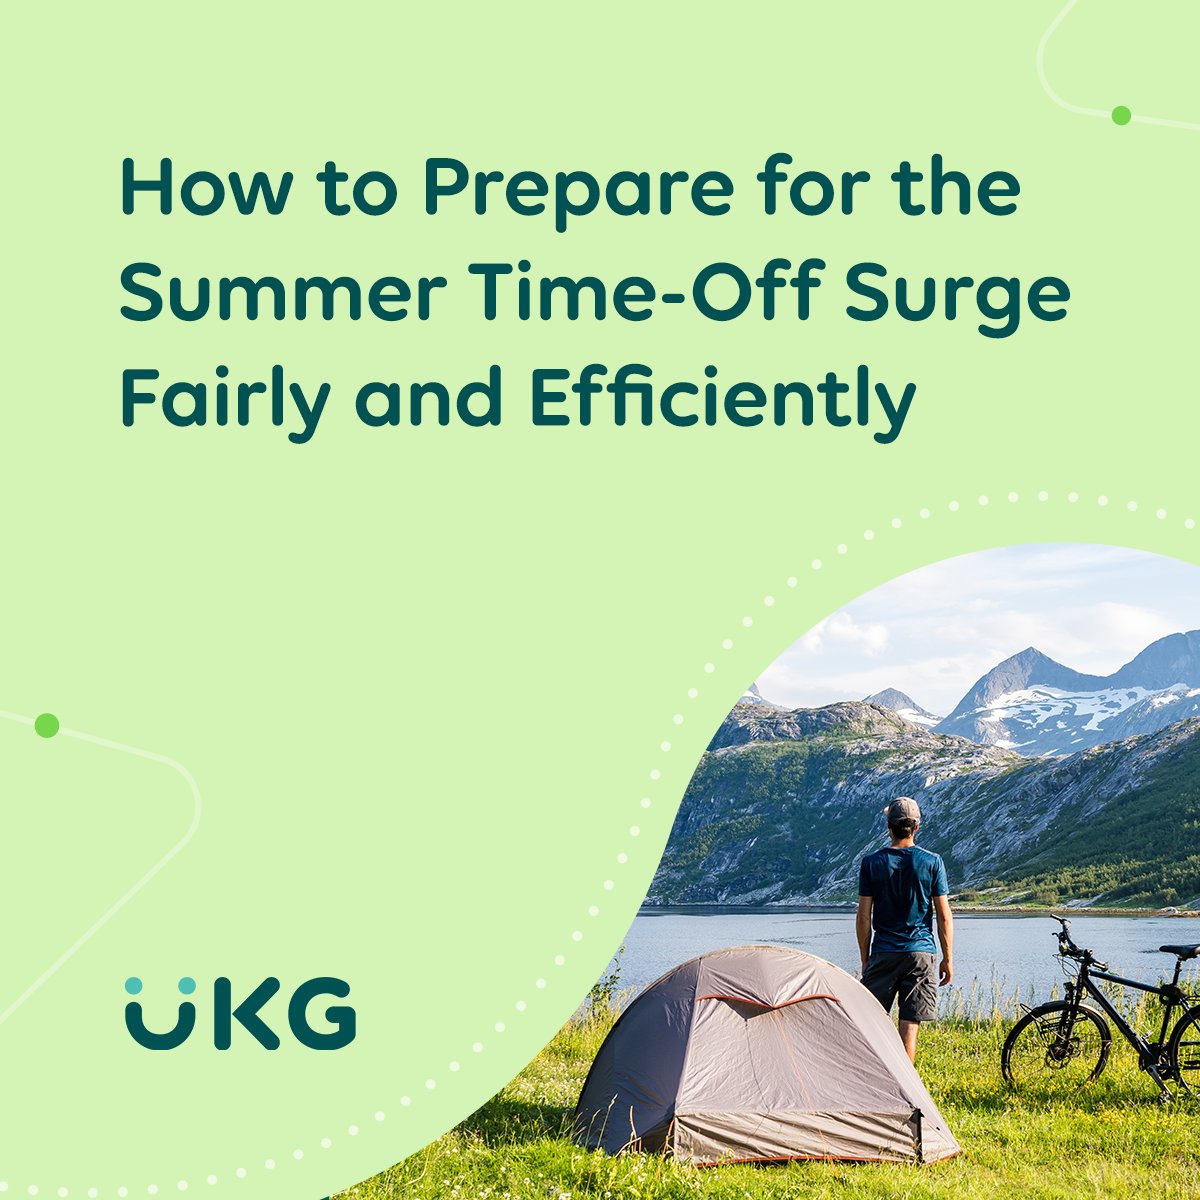 Summer is coming! ☀️ Is your business ready for the surge of time-off requests? Discover how to prepare your workforce efficiently and fairly in our latest blog post: ukg.inc/3wt499a. 🌊 #SummerSurge #HR #UKG